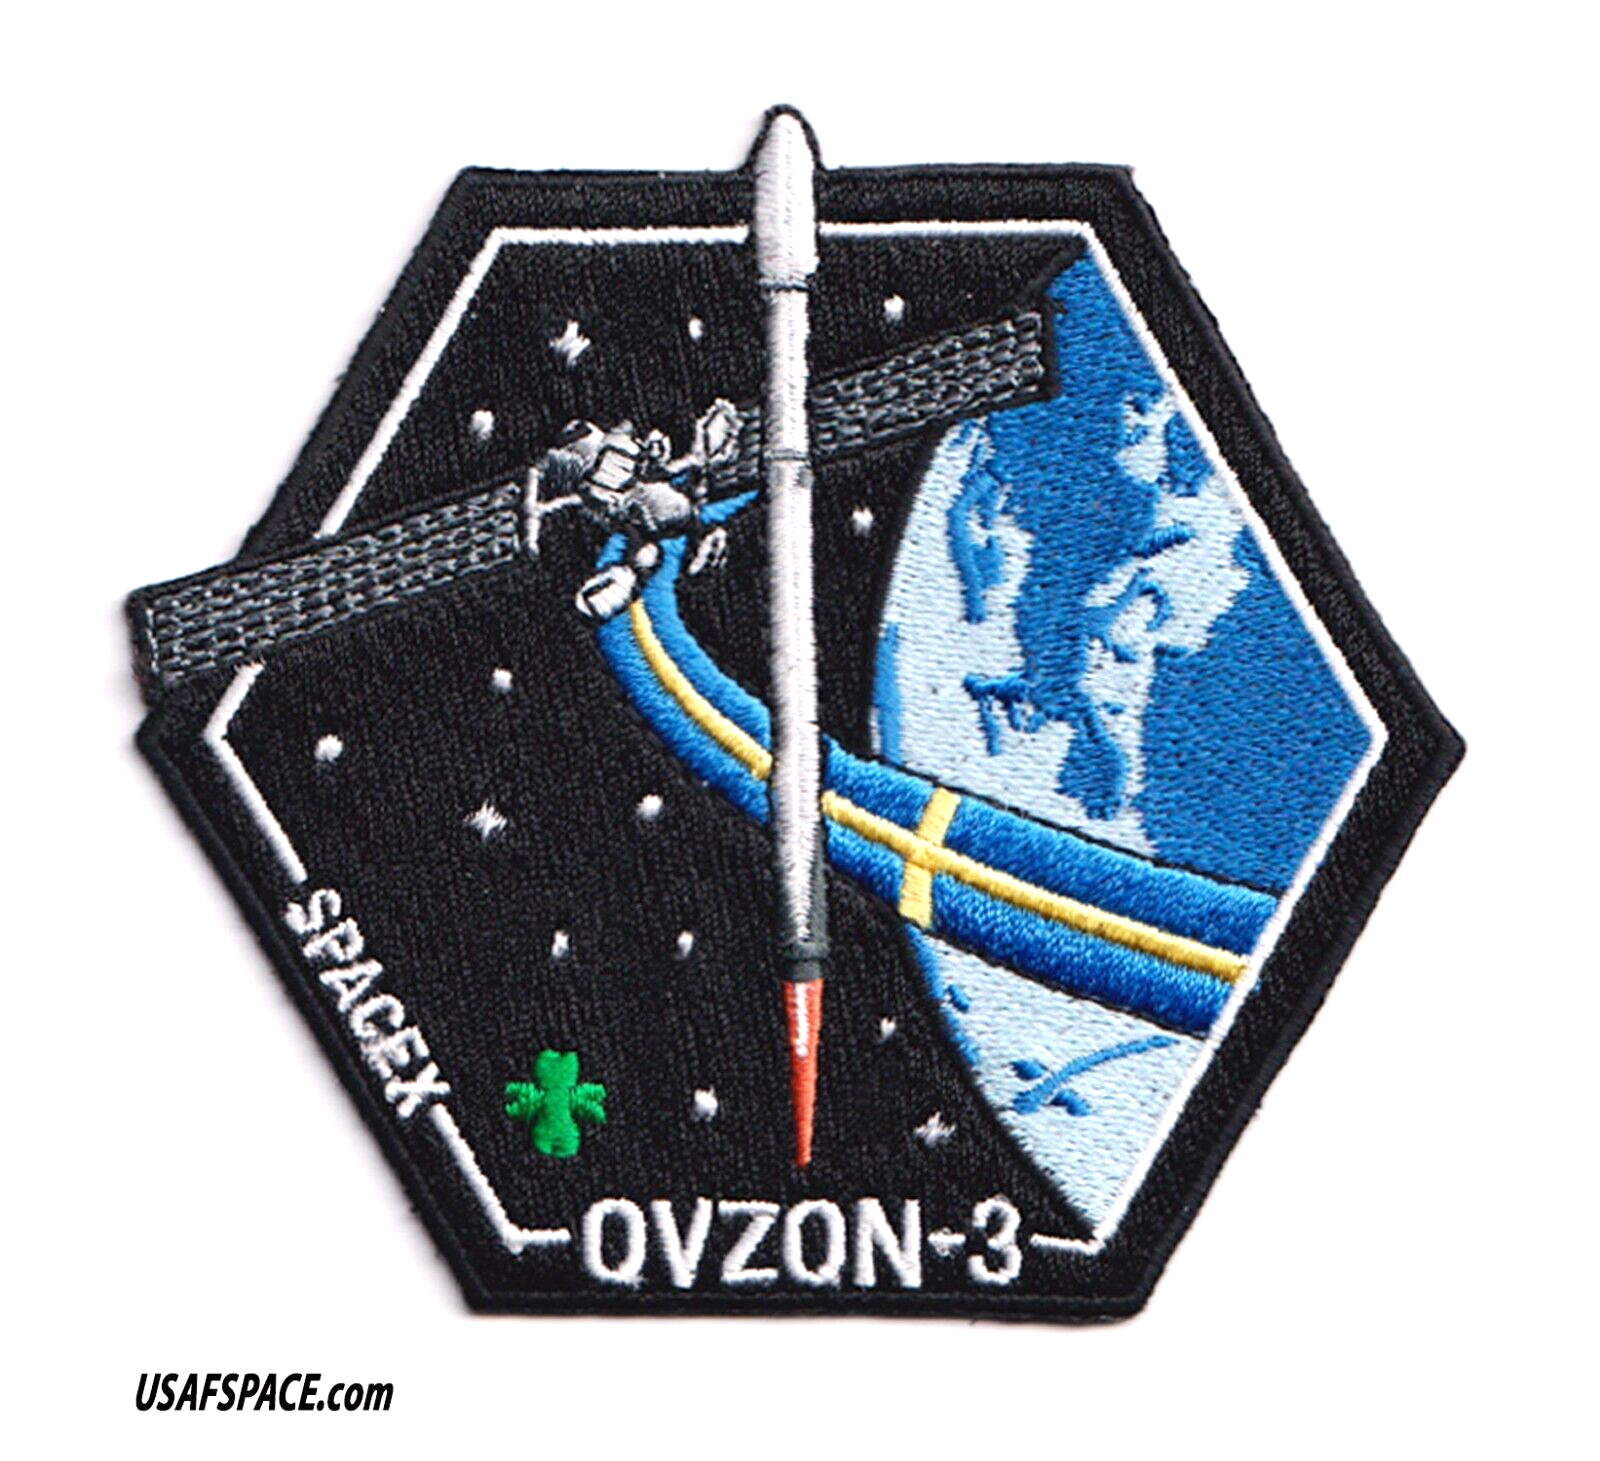 Authentic OVZON-3  SPACEX FALCON-9 SATELLITE Mission Employee PATCH